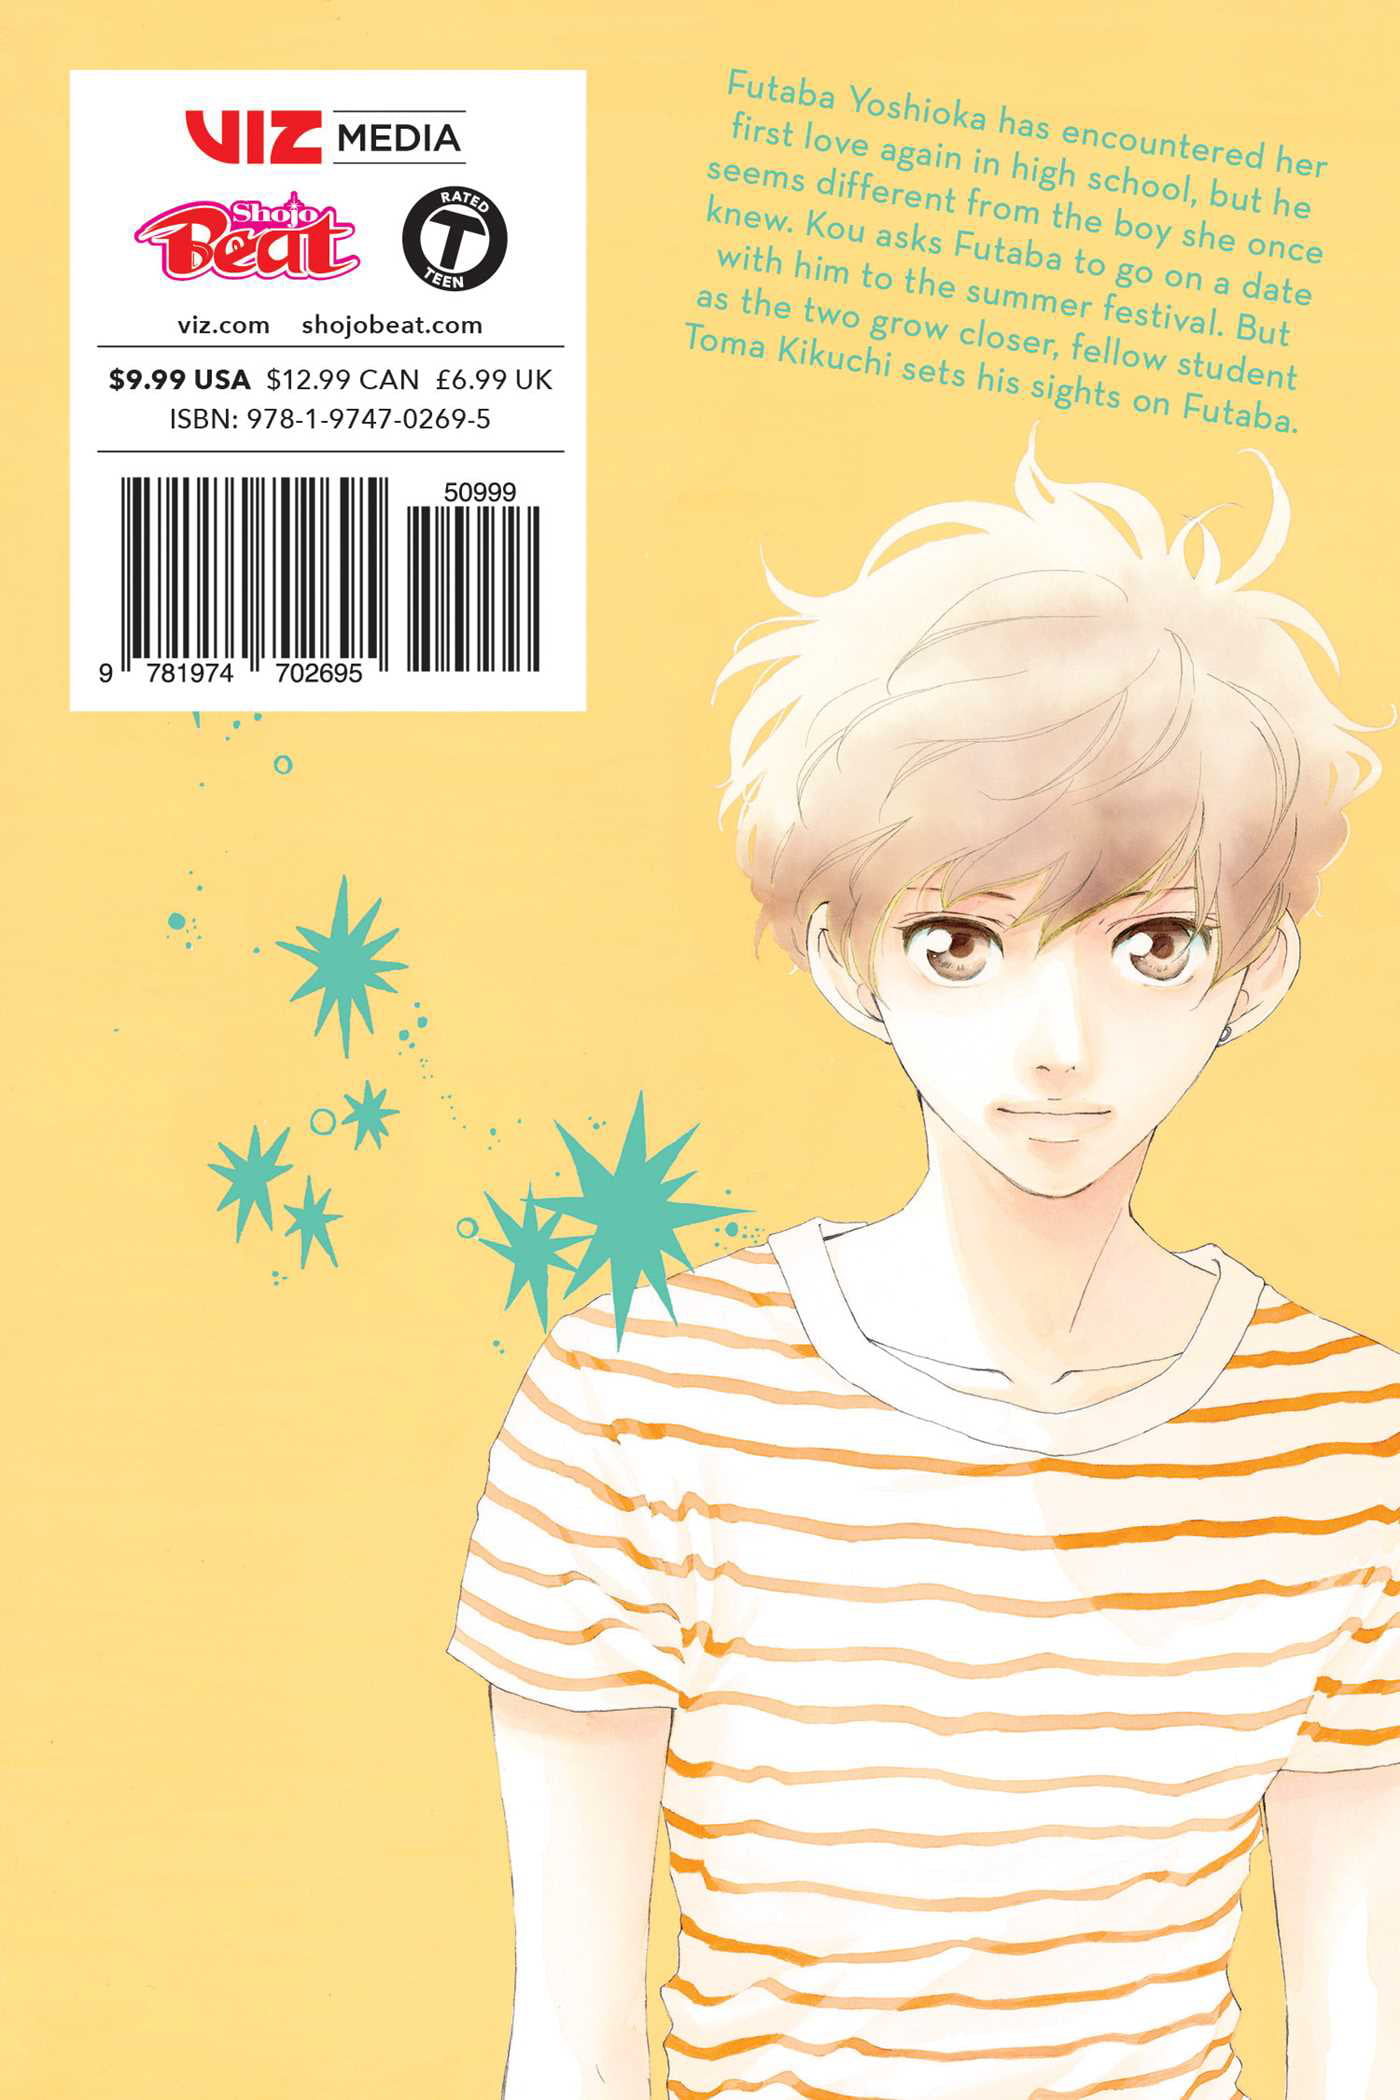 Ao Haru Ride, Vol. 13, Book by Io Sakisaka, Official Publisher Page